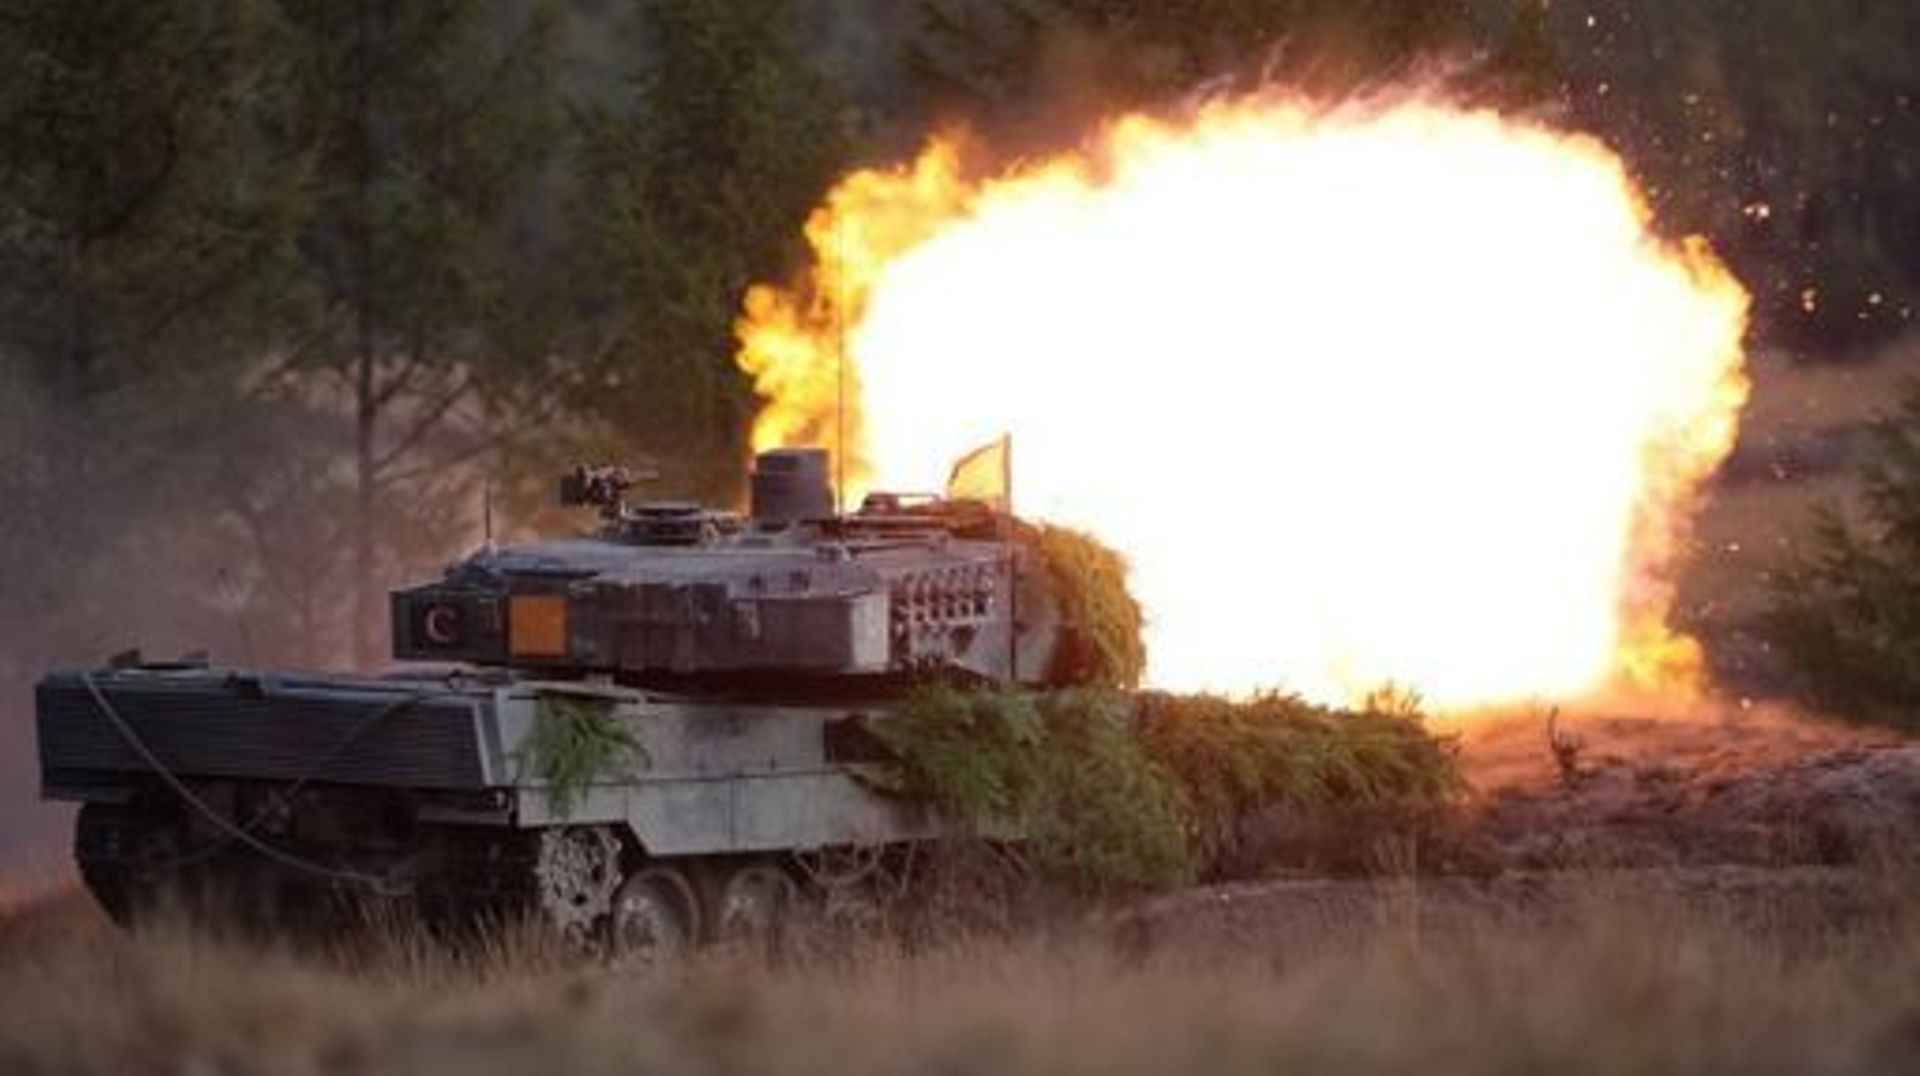 A Leopard 2 main battle tank of the German armed forces Bundeswehr shoots during a visit by the German Chancellor of  the troops during a training exercise at the military ground in Ostenholz, northern Germany, on October 17, 2022. Germany on January 25, 